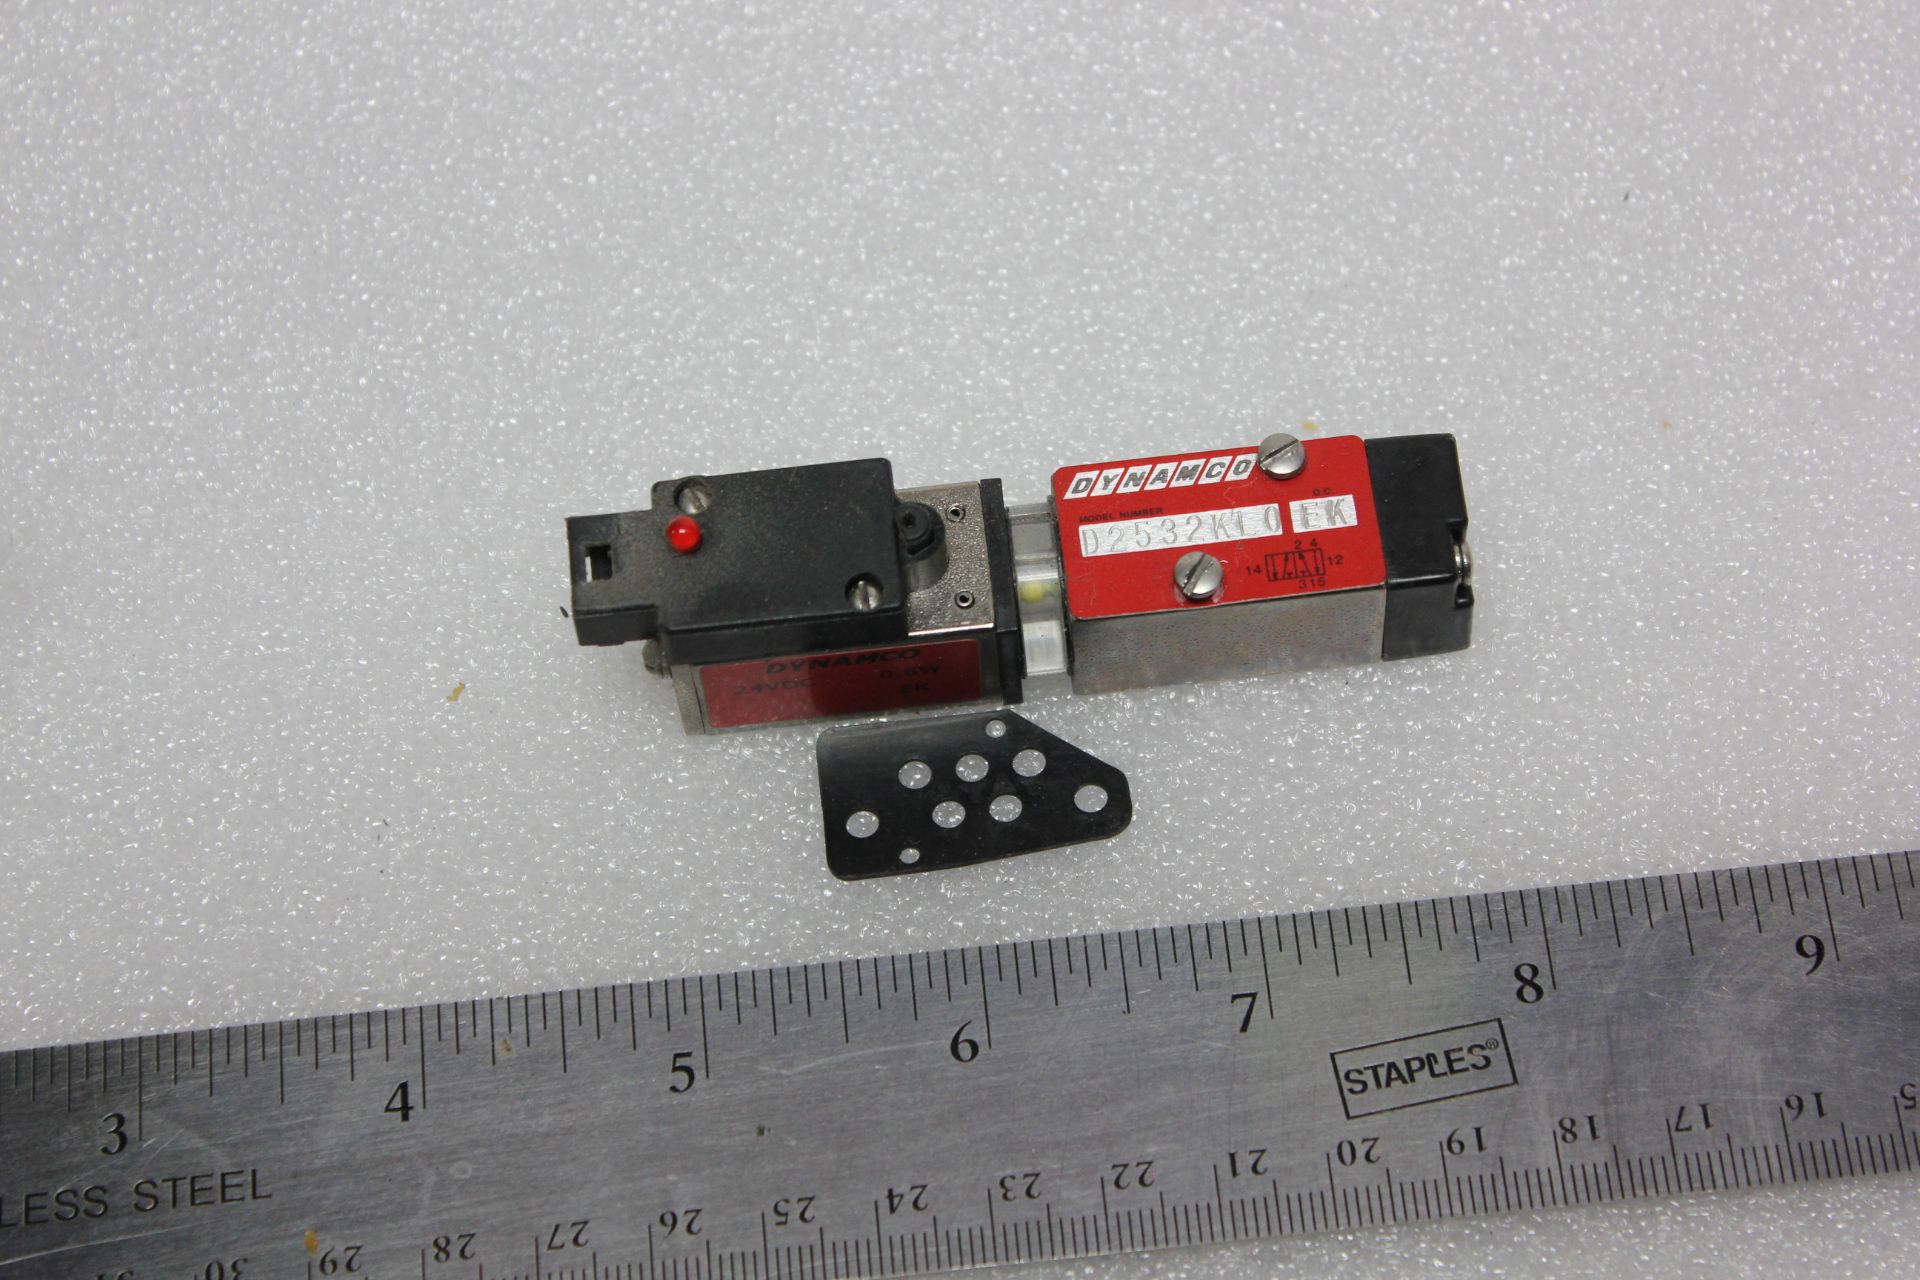 NEW DYNAMCO SOLENOID VALVE - Image 2 of 2